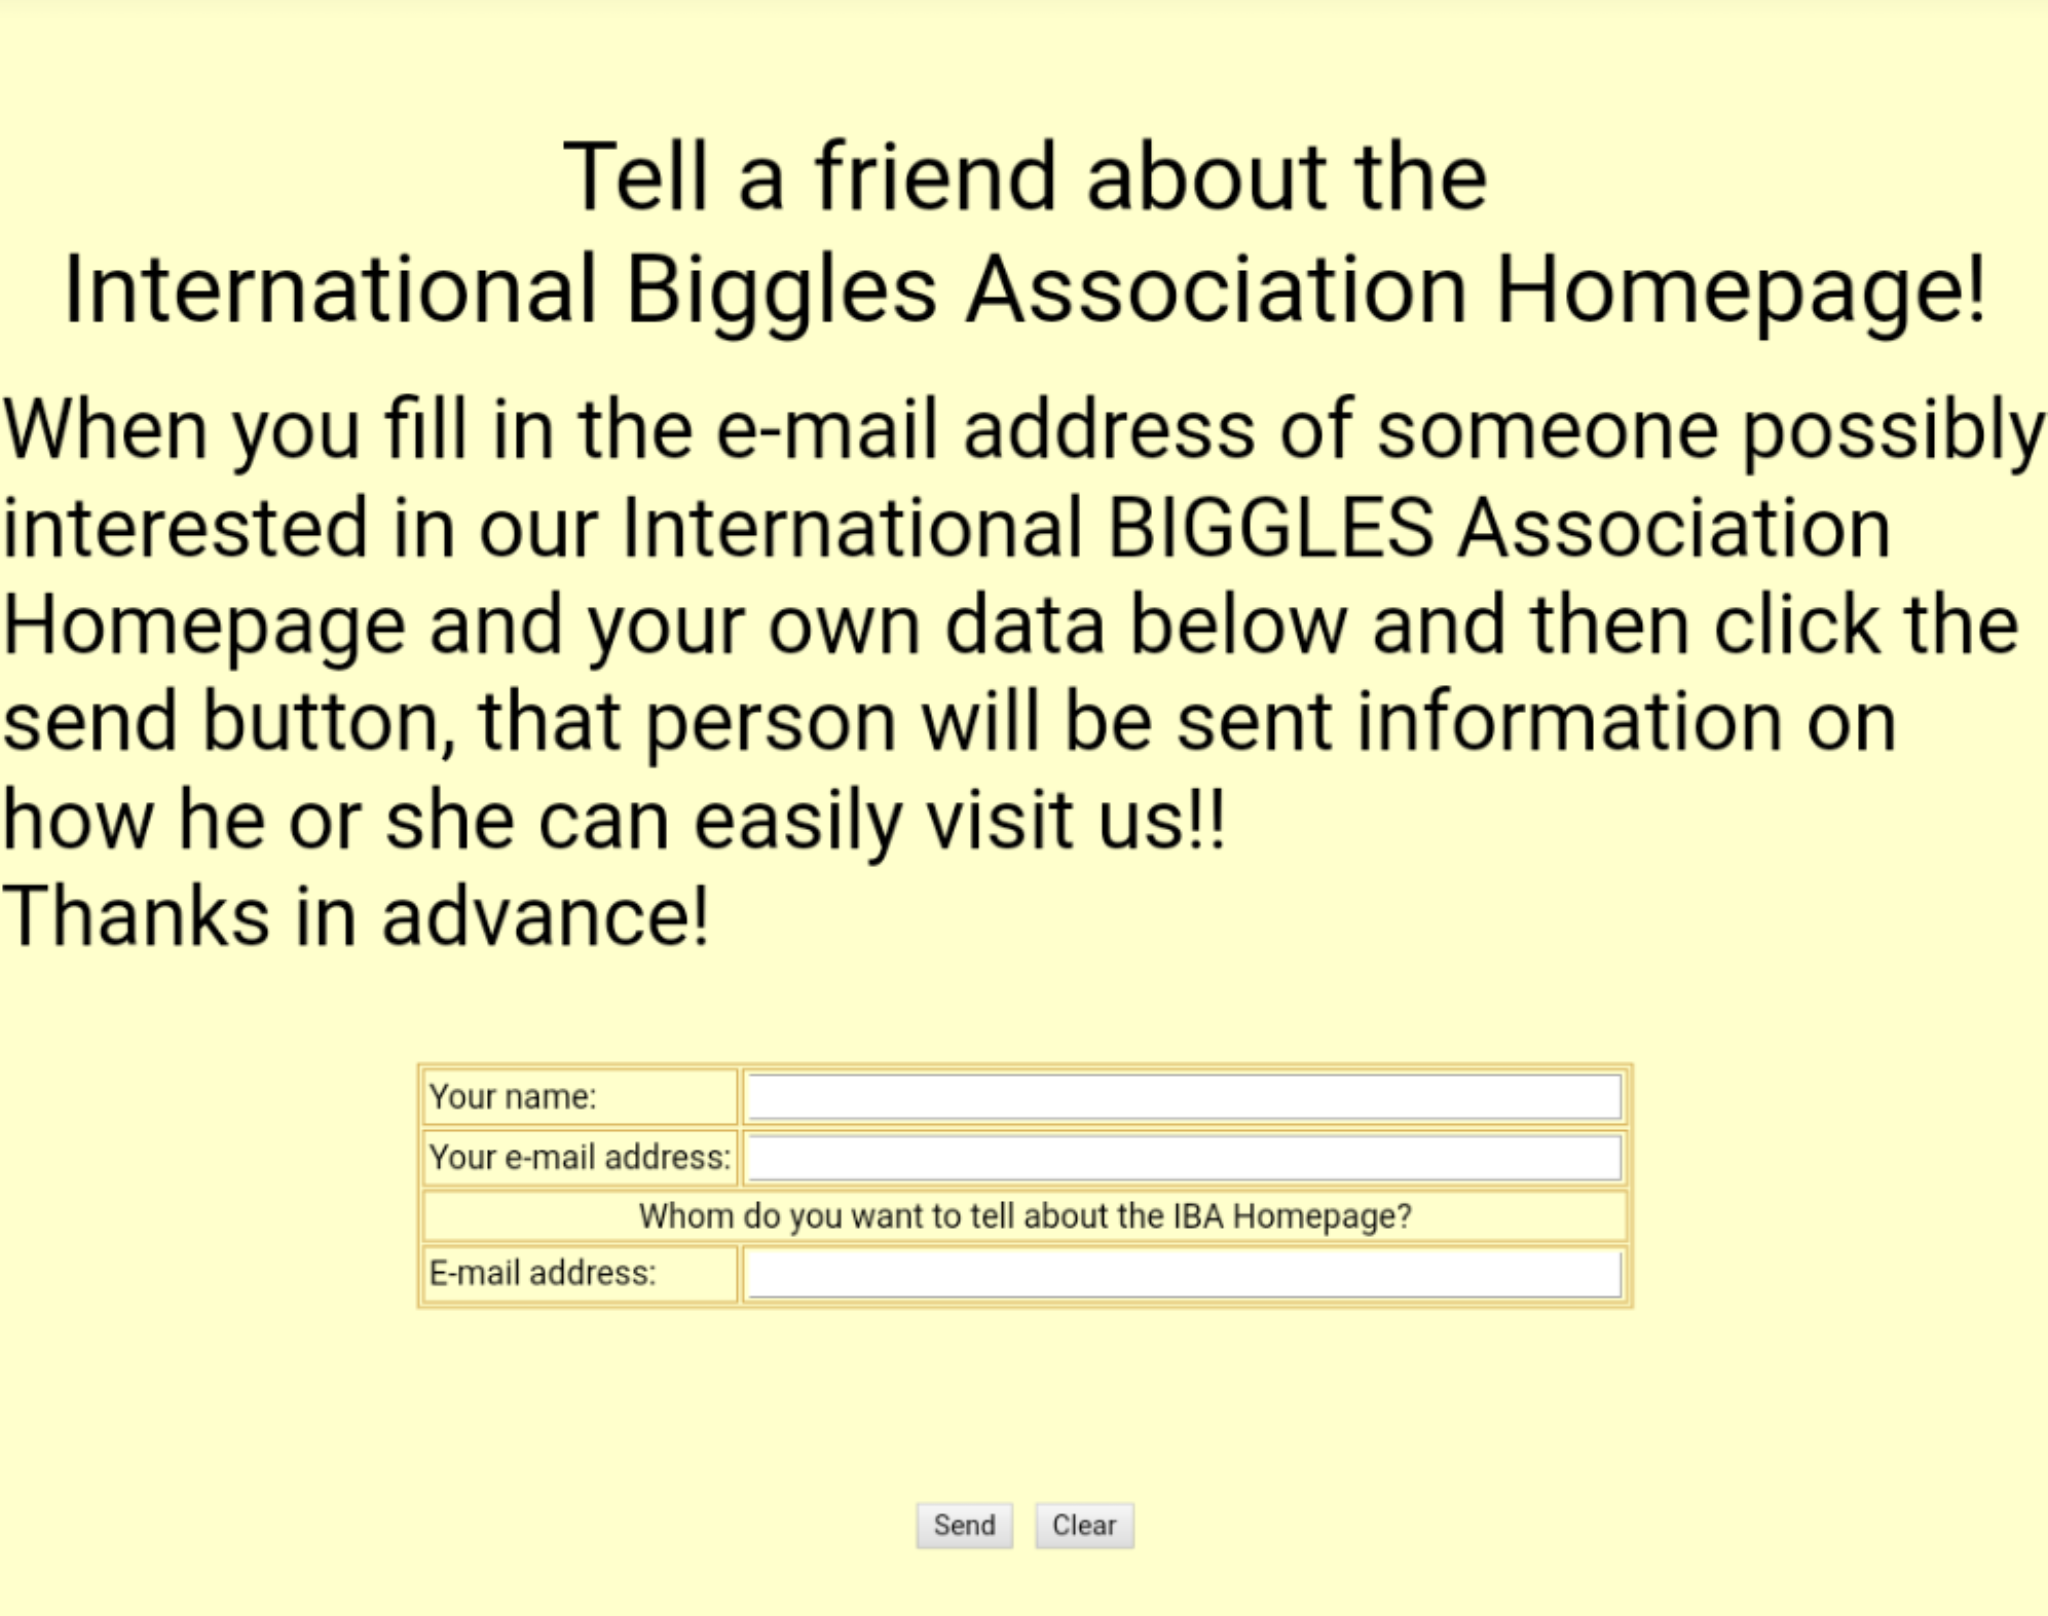 International Biggles Association email notification page that allows members to input a friend's email address to notify them about the association.